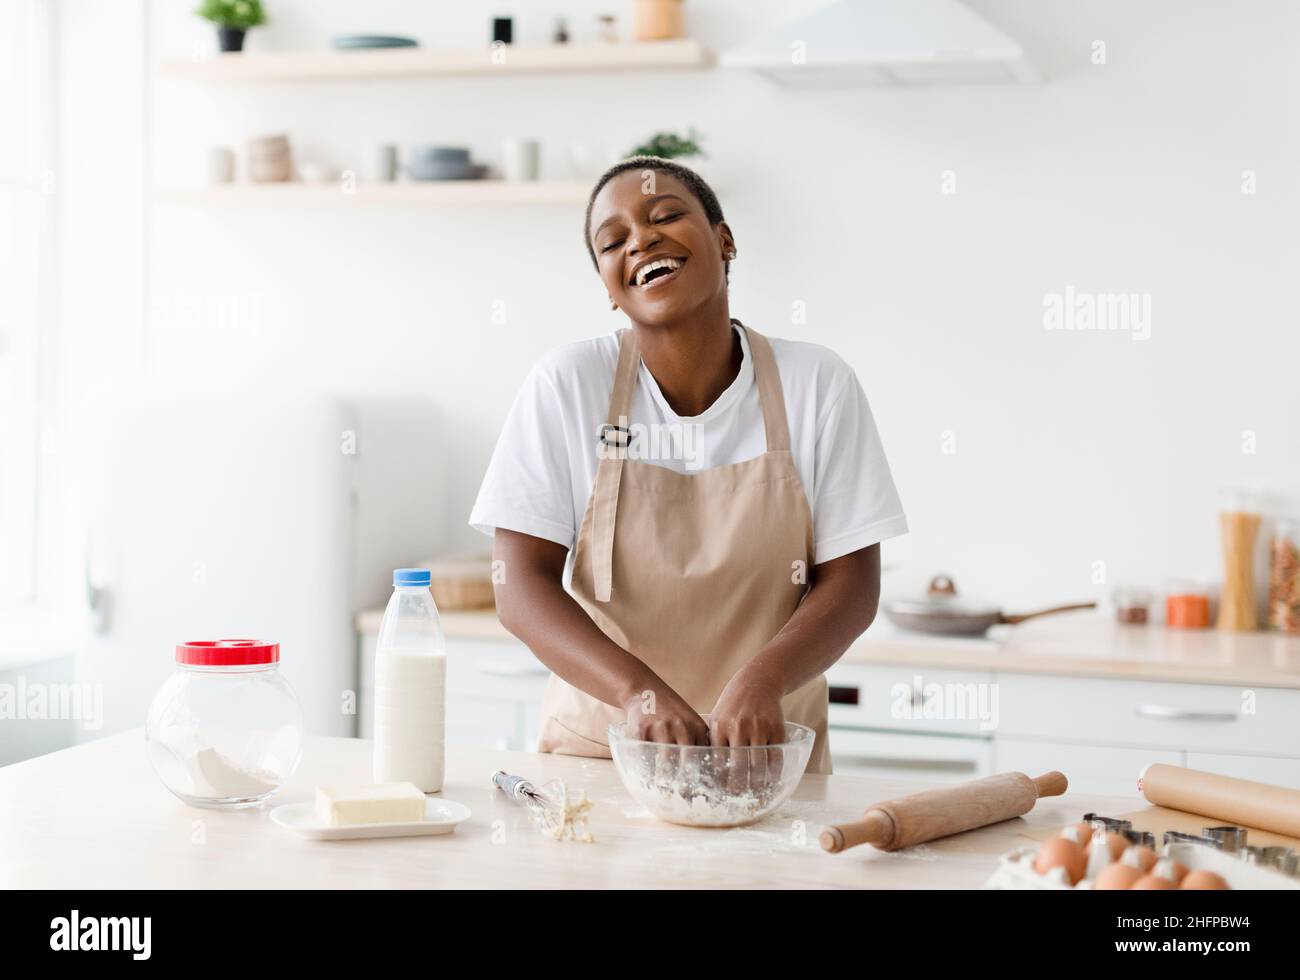 Happy glad laughing young attractive black lady in apron prepares dough for baking in modern kitchen interior Stock Photo